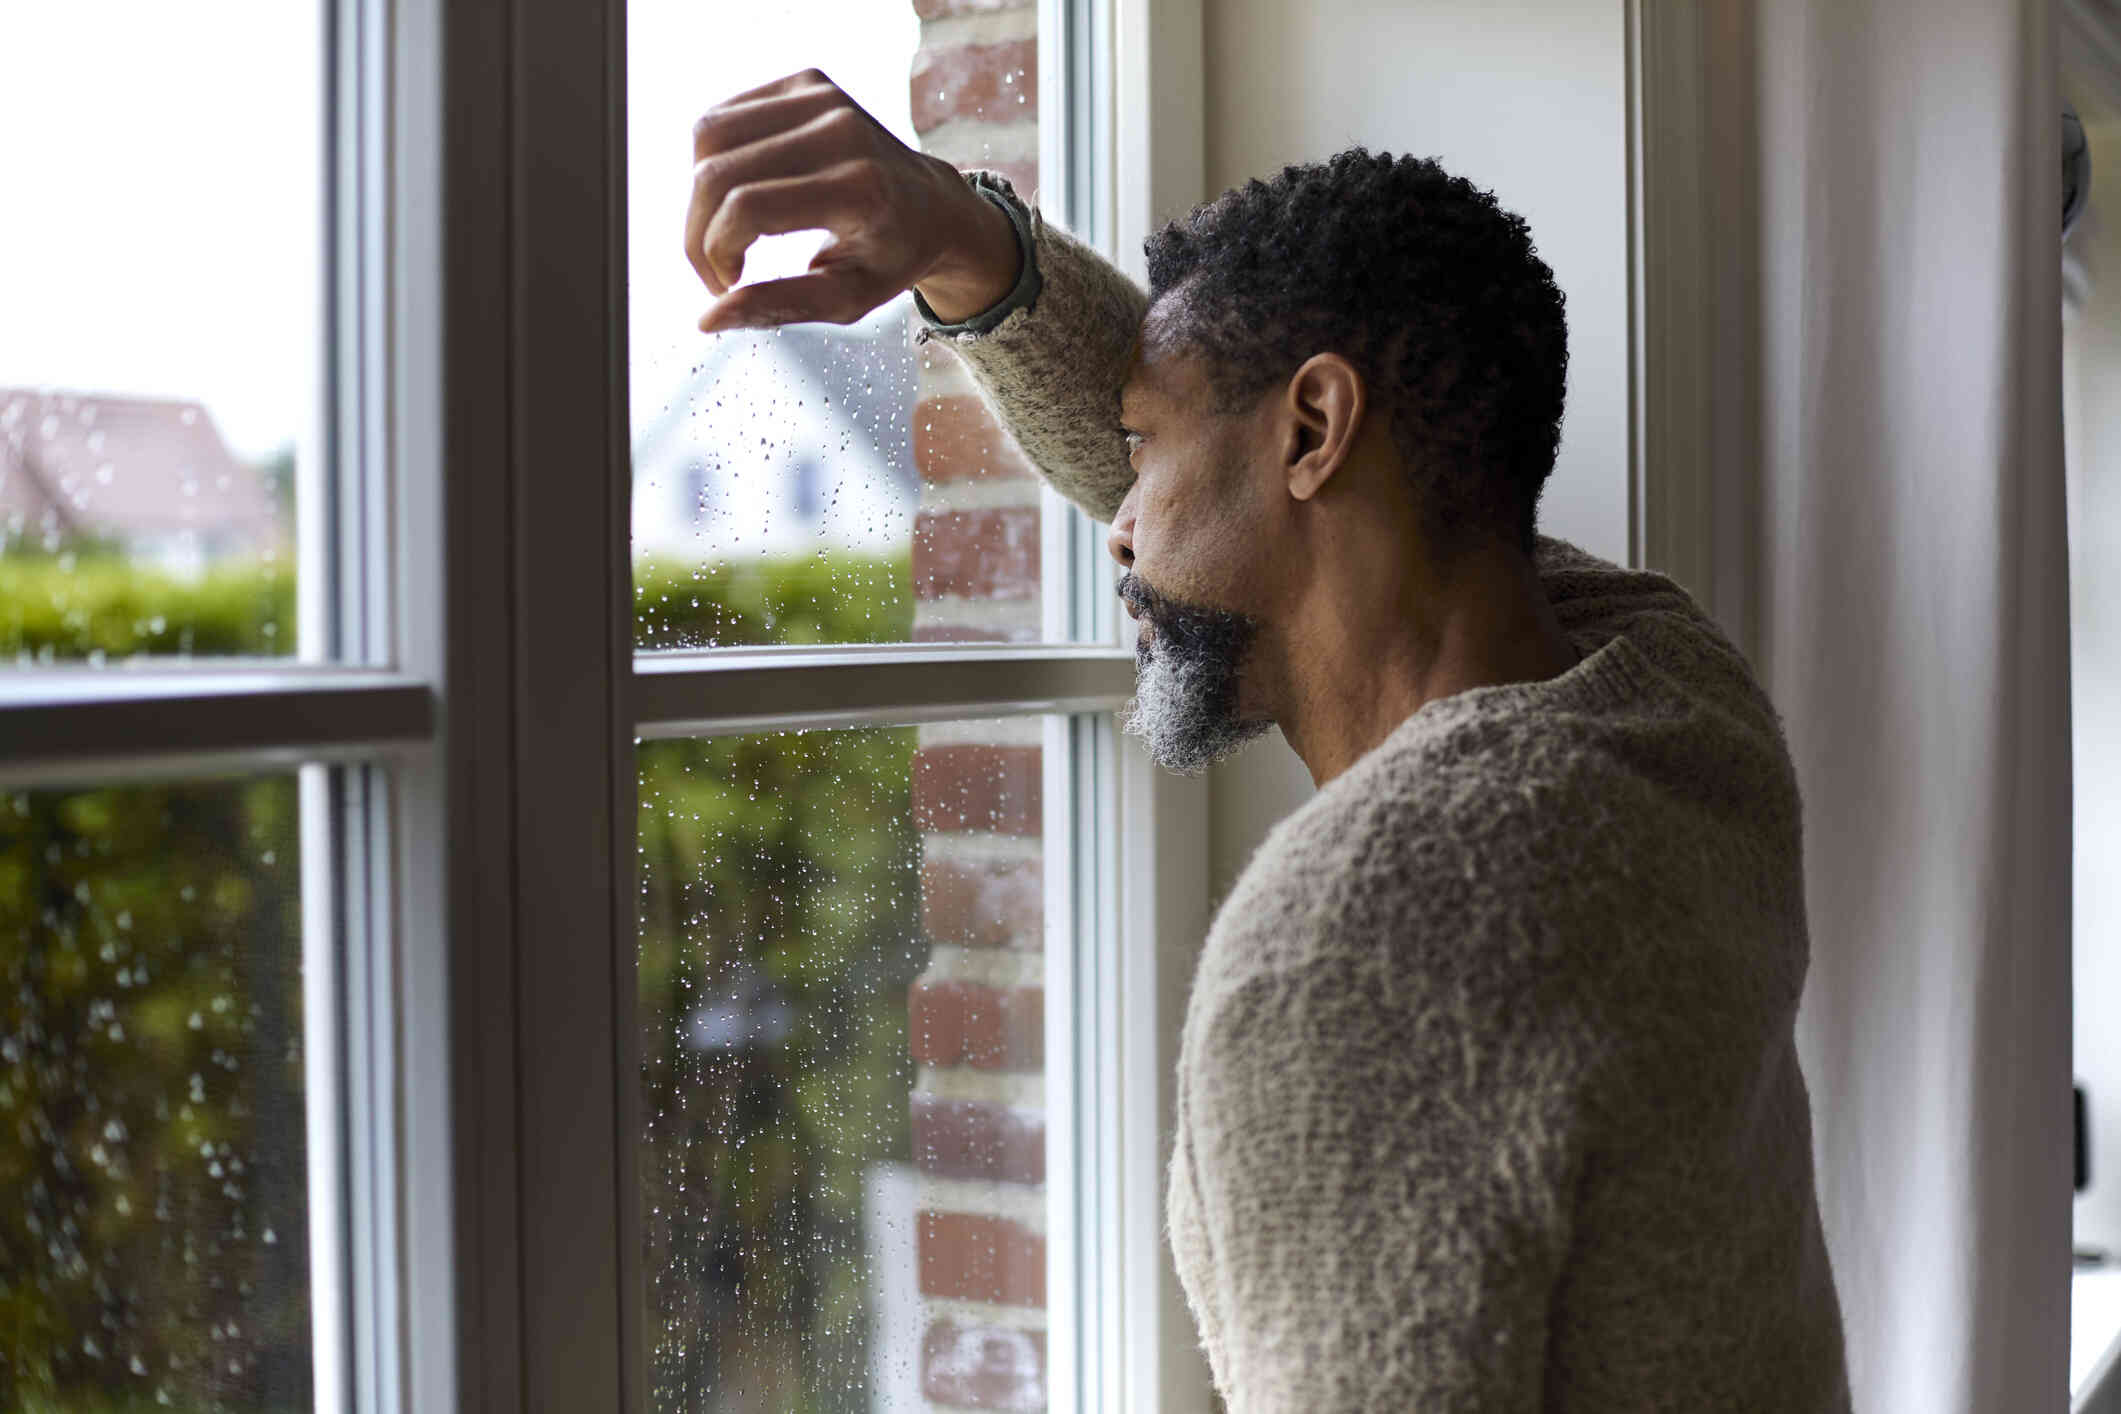 An elderly man in a sweater stands at the window and rests his head against his arm while gazing out with a sad expression.